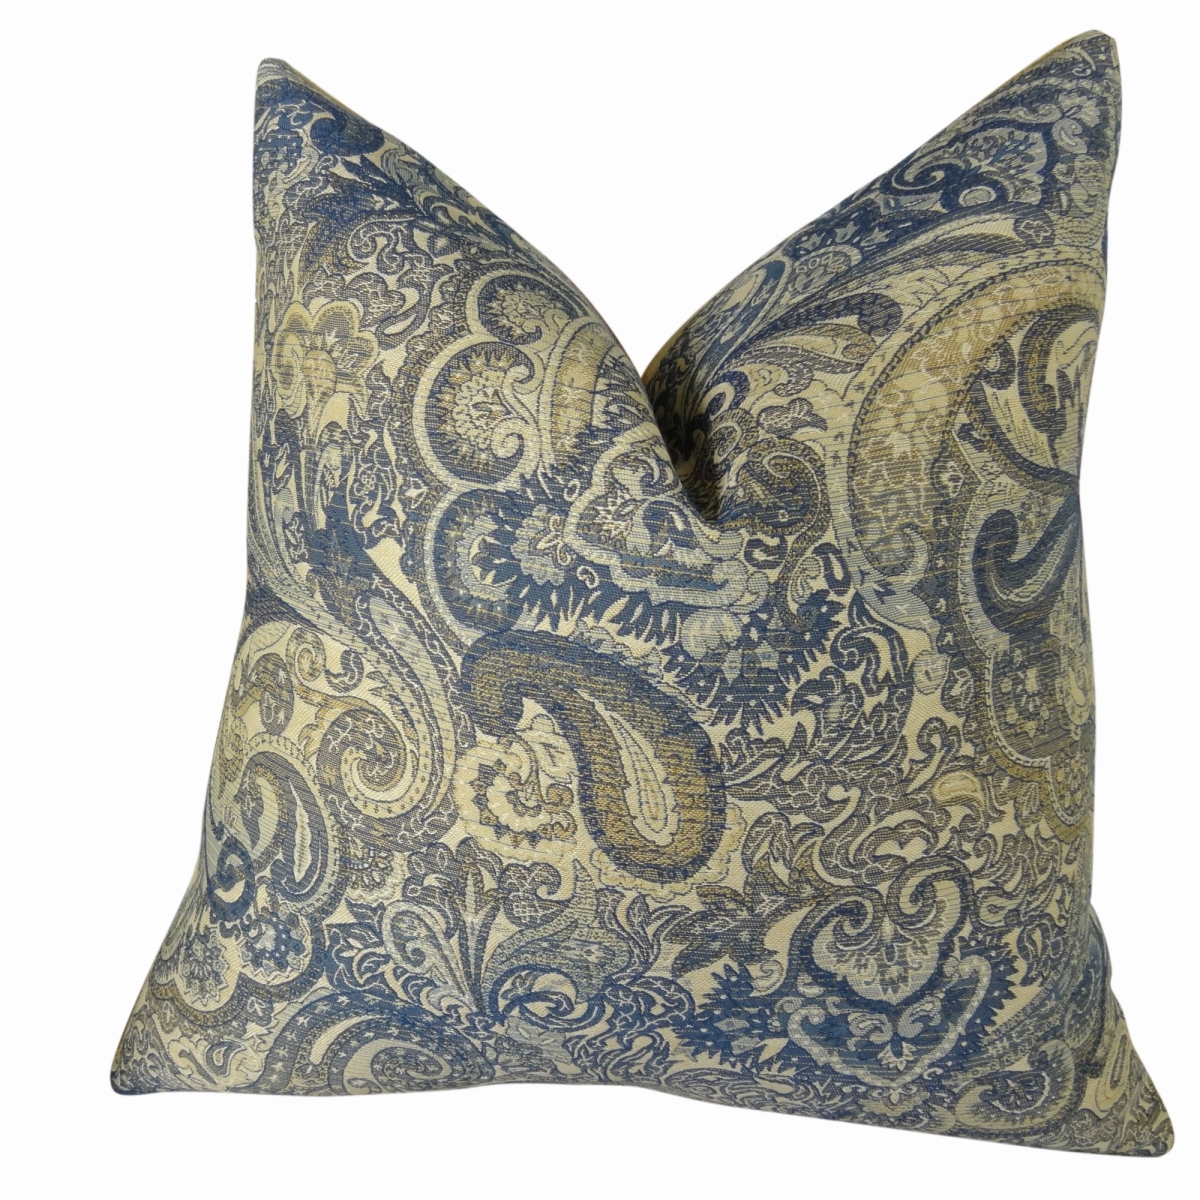 Paciotti Handmade Double Sided Throw Pillow - Navy - Blue & Taupe - 16 x 16 in -  DwellingDesigns, DW3132110